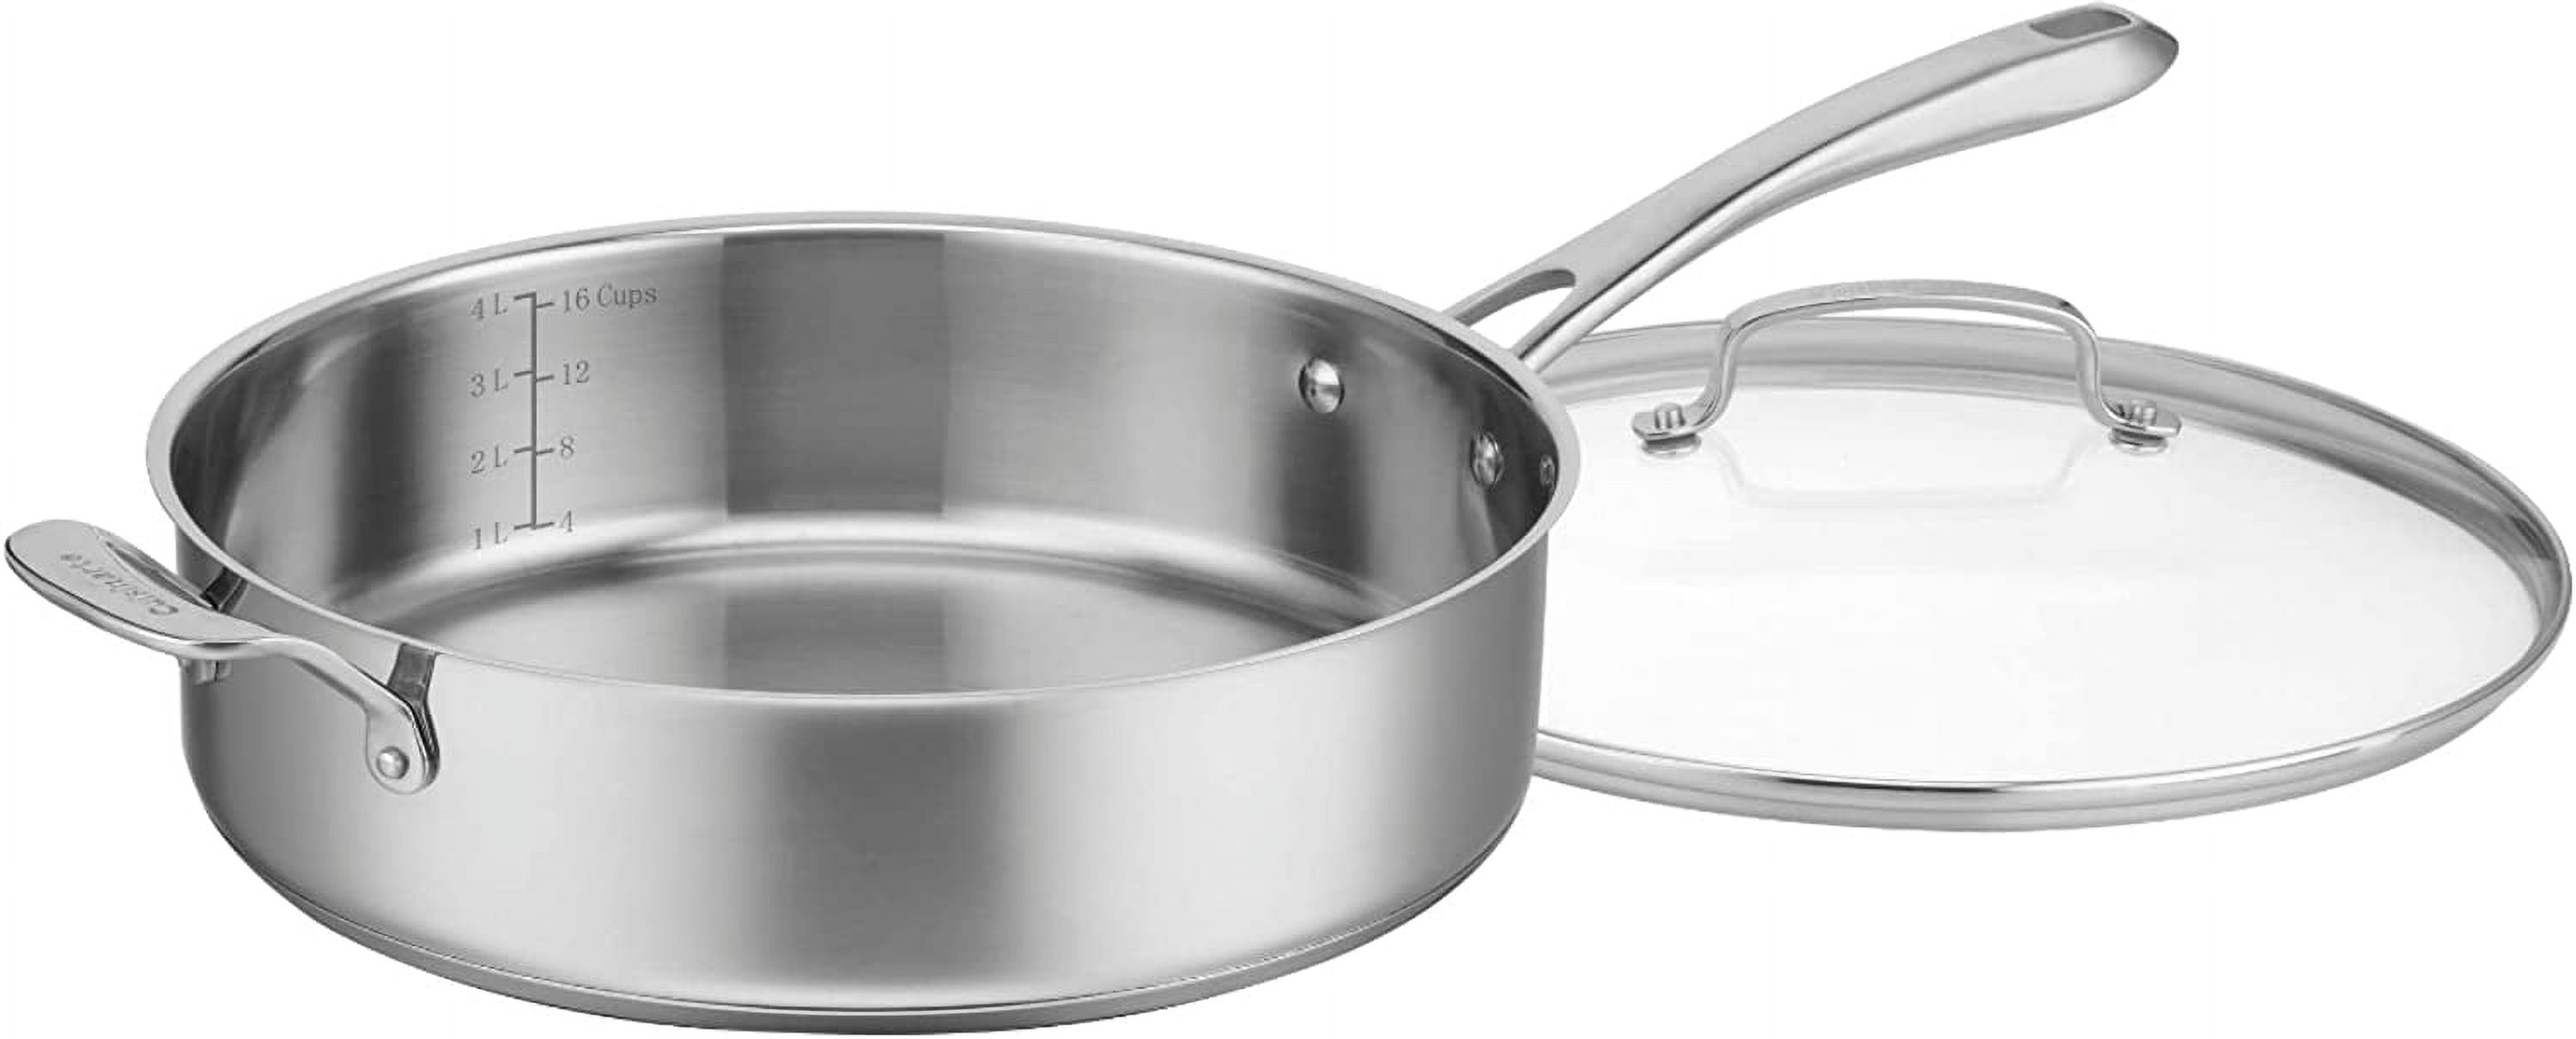 Chef's Classic™ Stainless 5.5 Quart Sauté Pan with Helper Handle & Cover